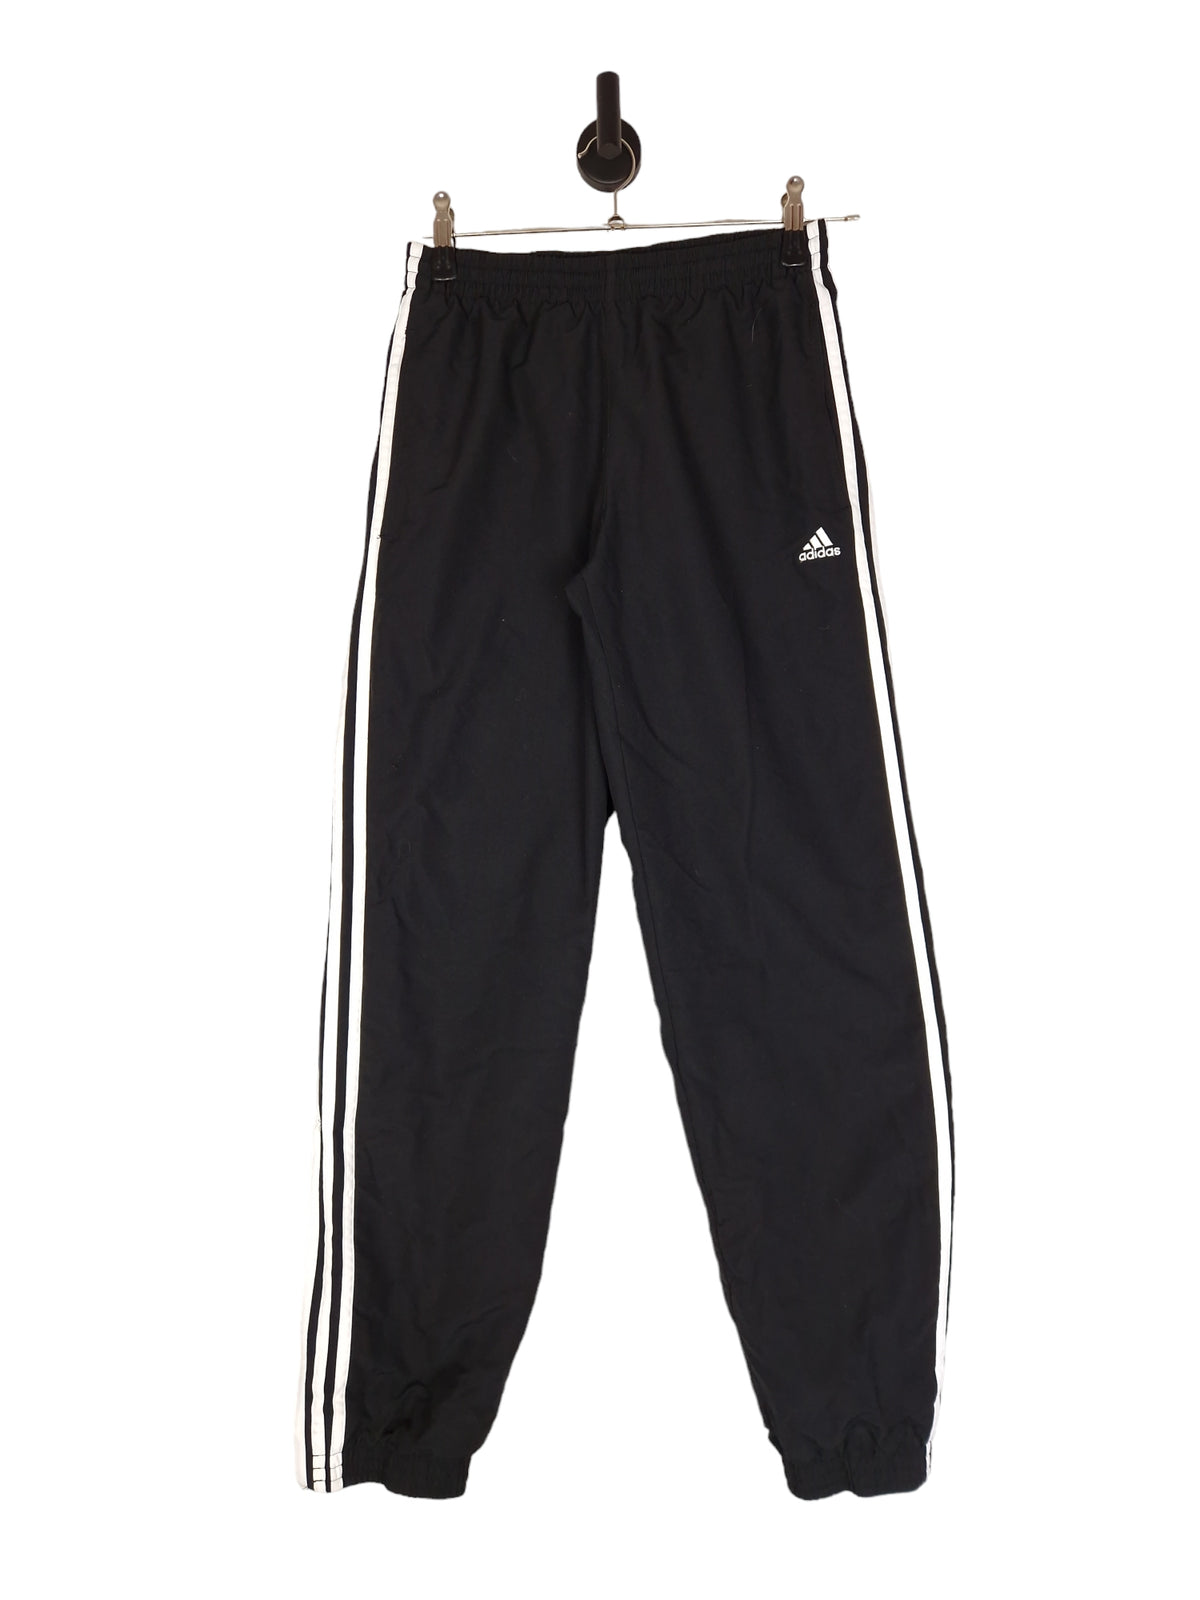 Adidas Jogging Bottoms - Size Small